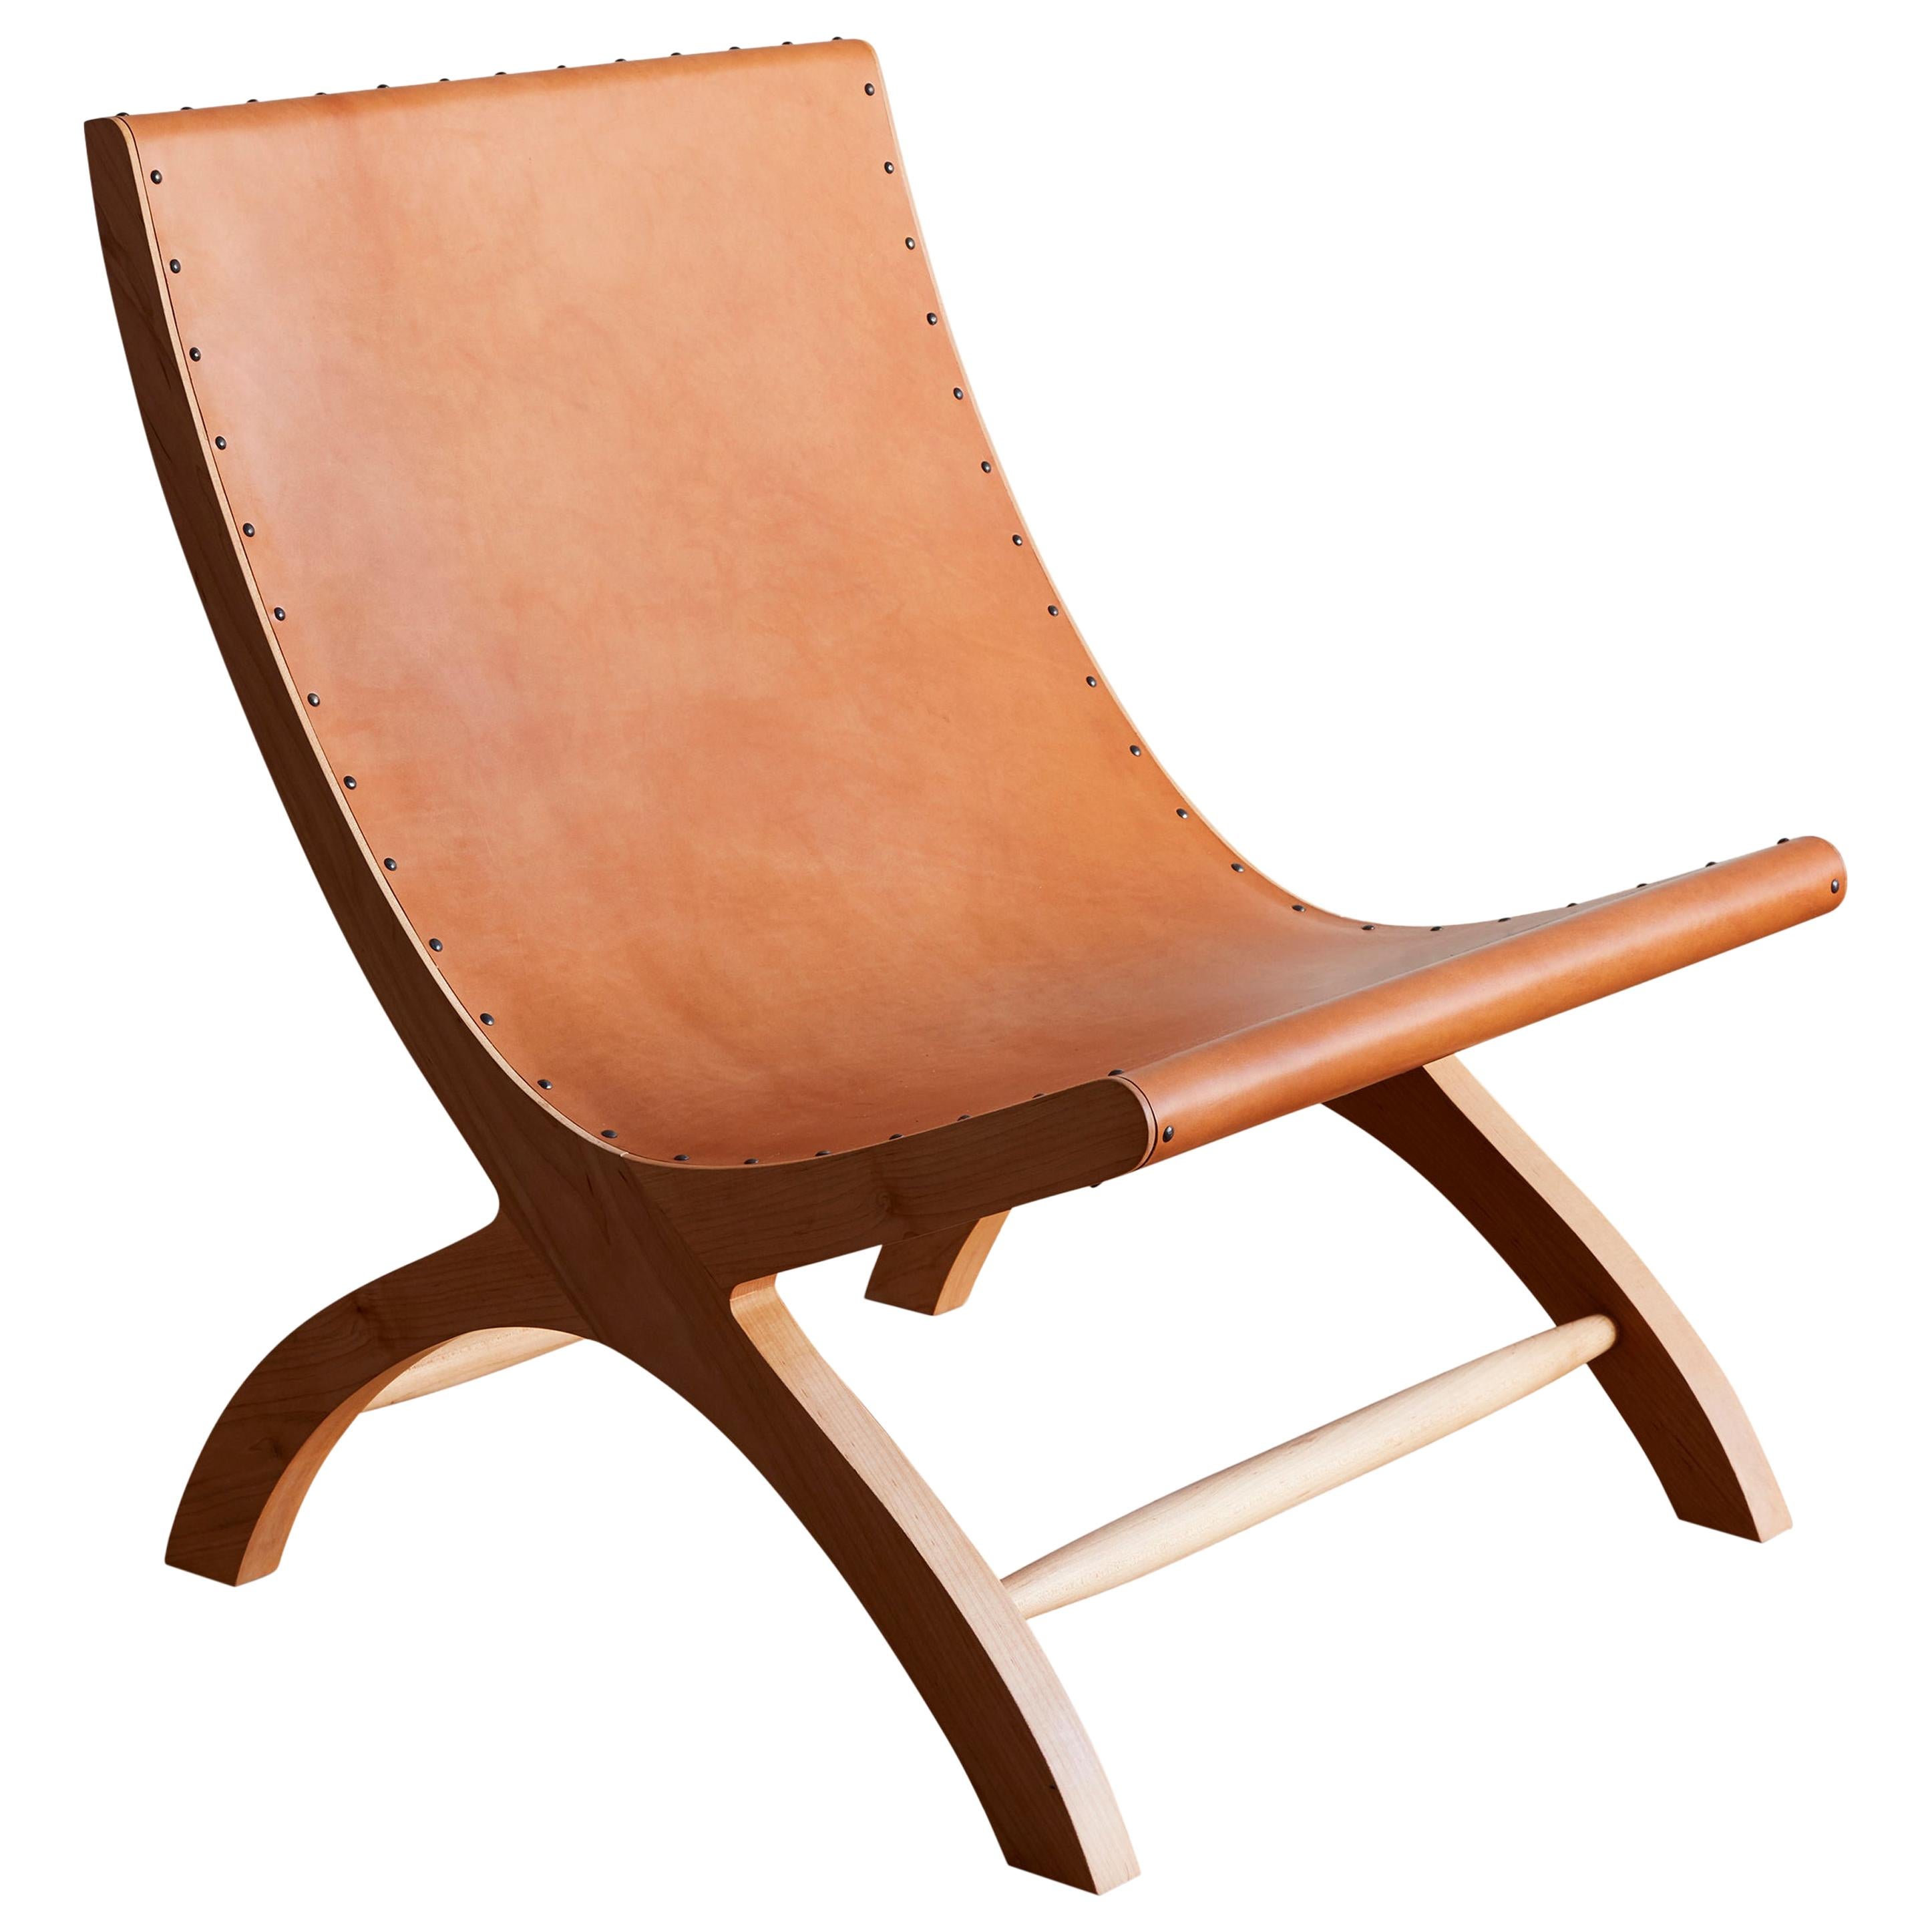 Clara Porset's Wood and Hide Butaque Chair, Licensed Reedition by Luteca